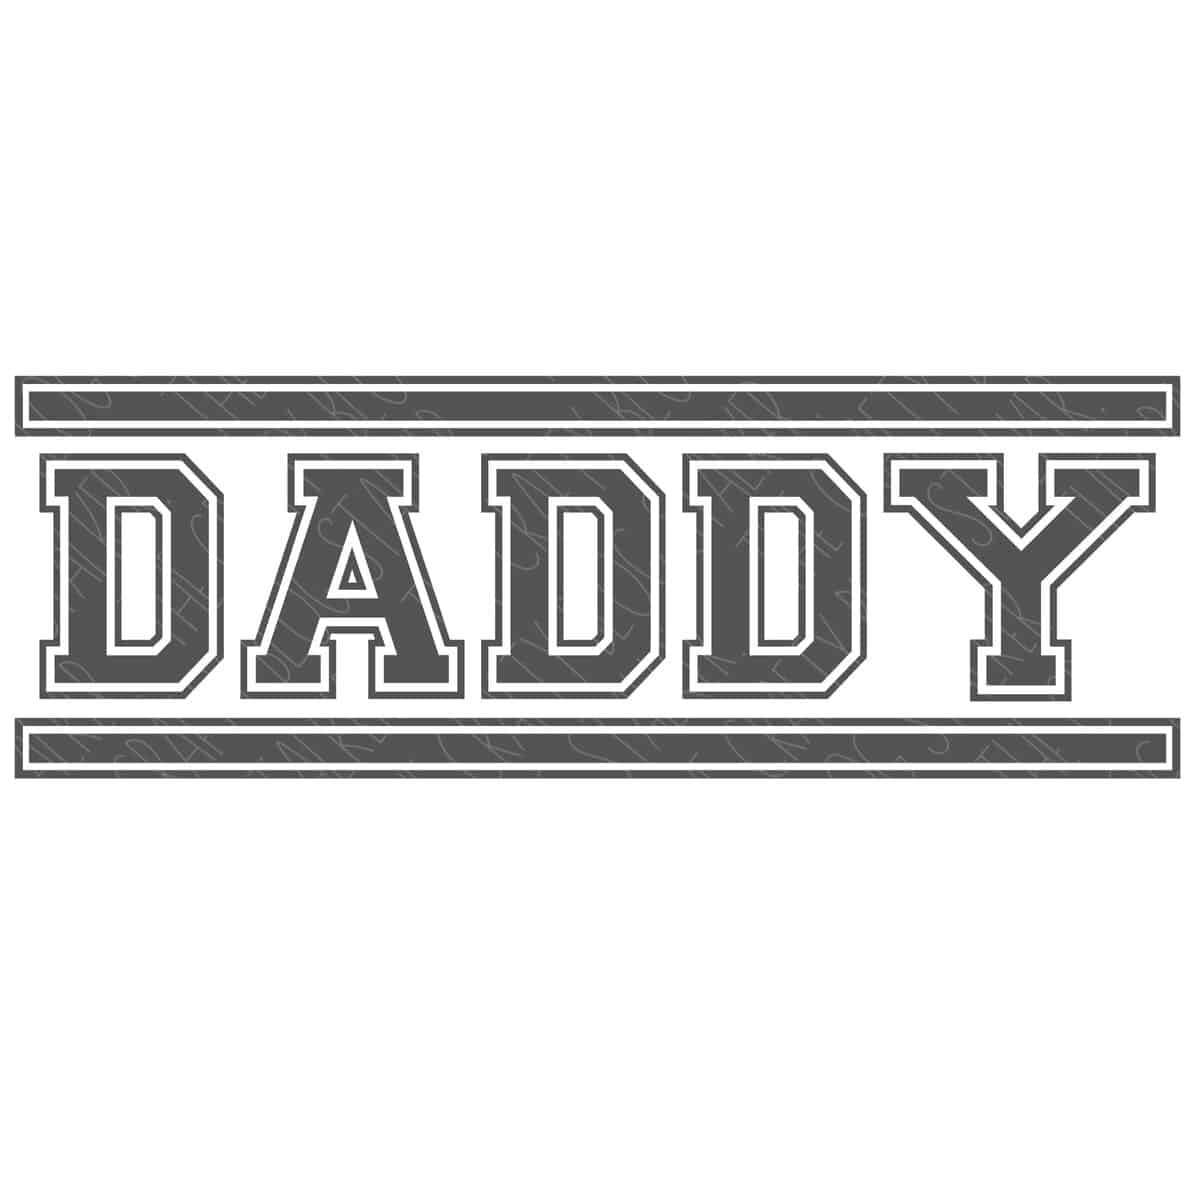 Daddy SVG	

			
		
	

		
			Free – Buy Now Checkout
							
					
						
							
						
						Added to cart